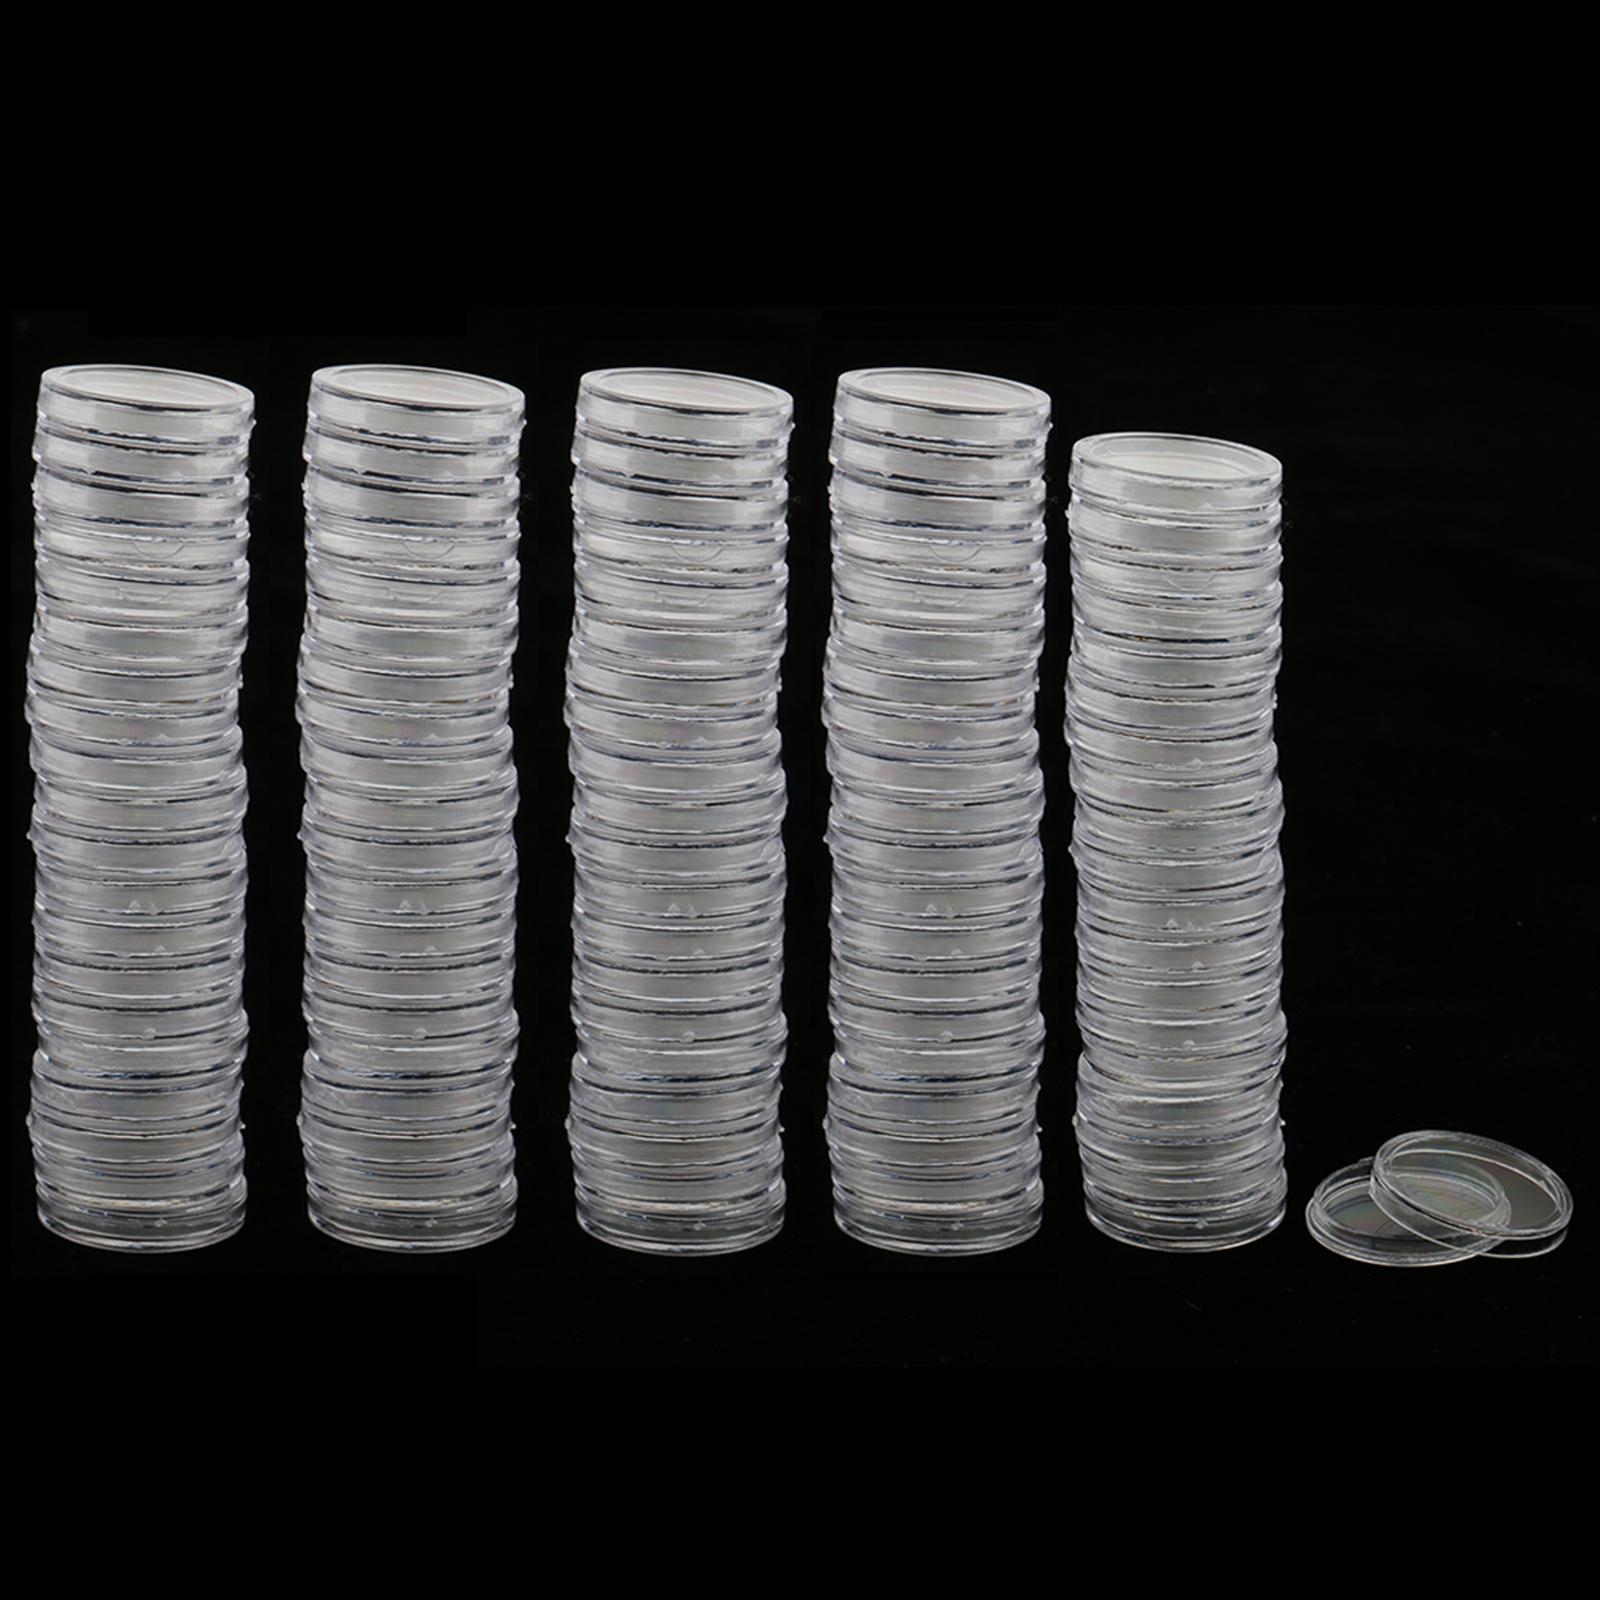 100x Coin Capsules Coin Storage Boxes Containers Plastic Case 19-40.6mm 15 Sizes 